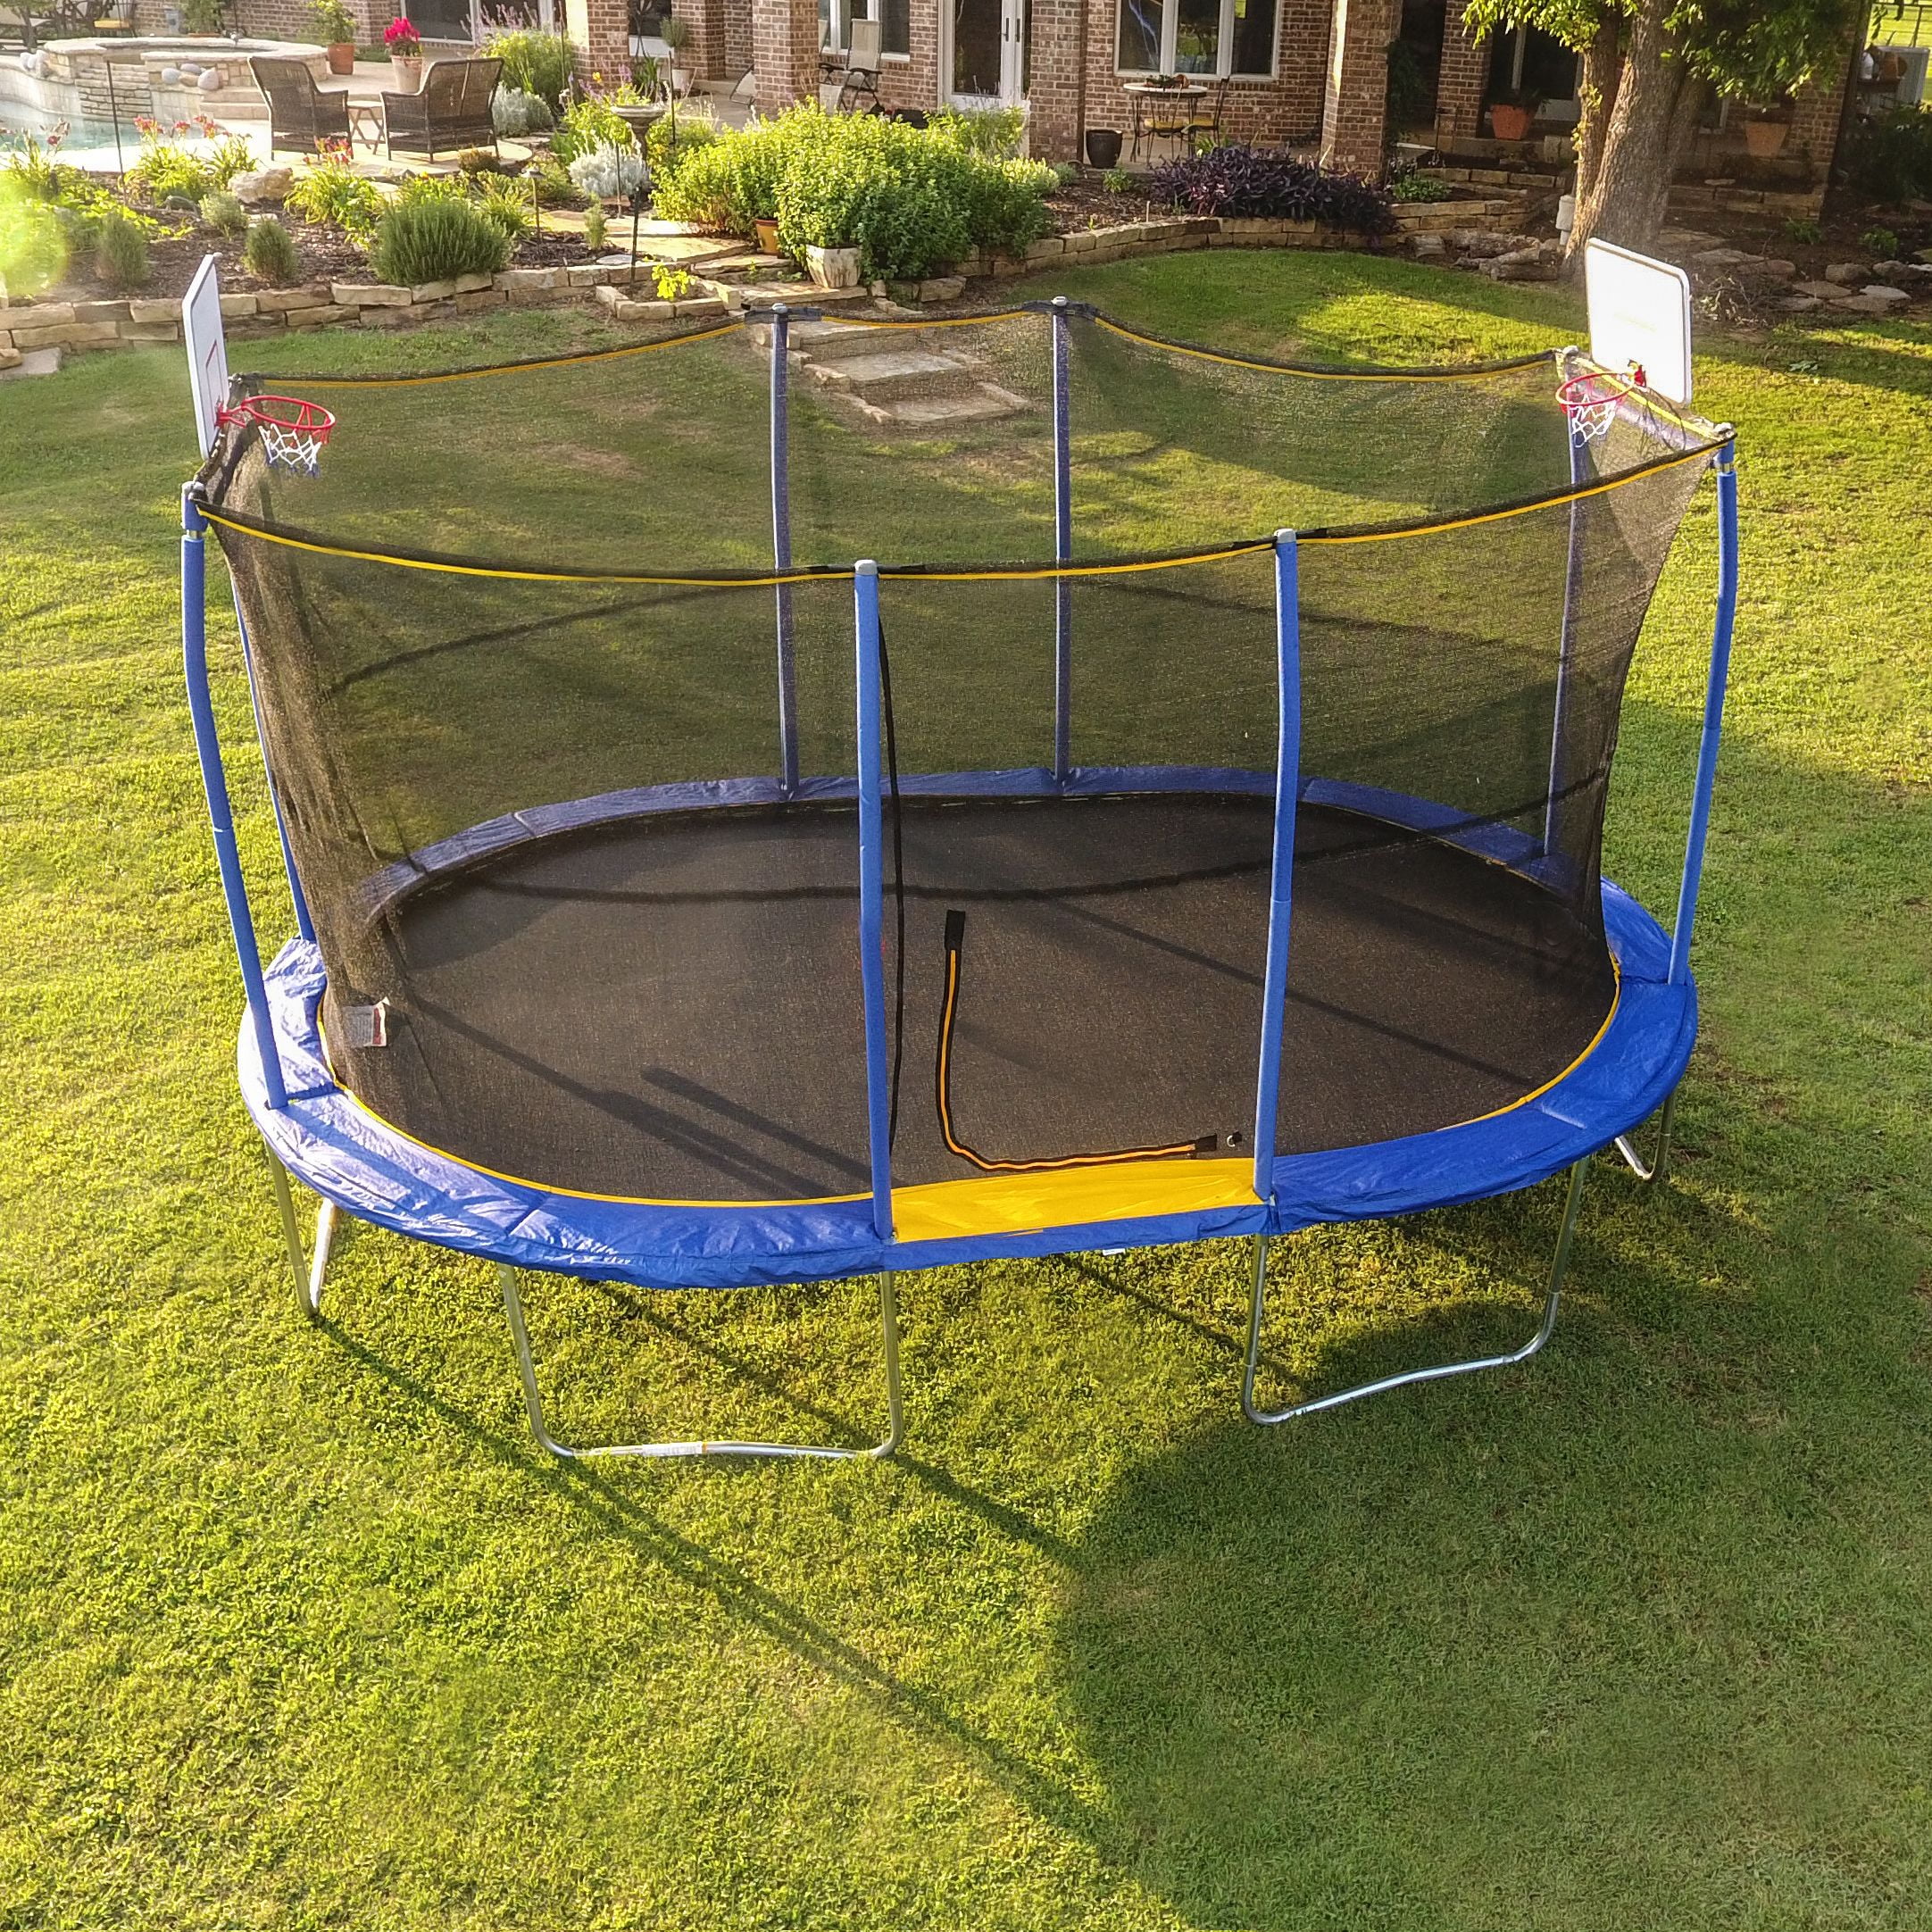 Jumpking Oval 10 x 15 Foot Trampoline, with Two Basketball Hoops, Blue/Yellow